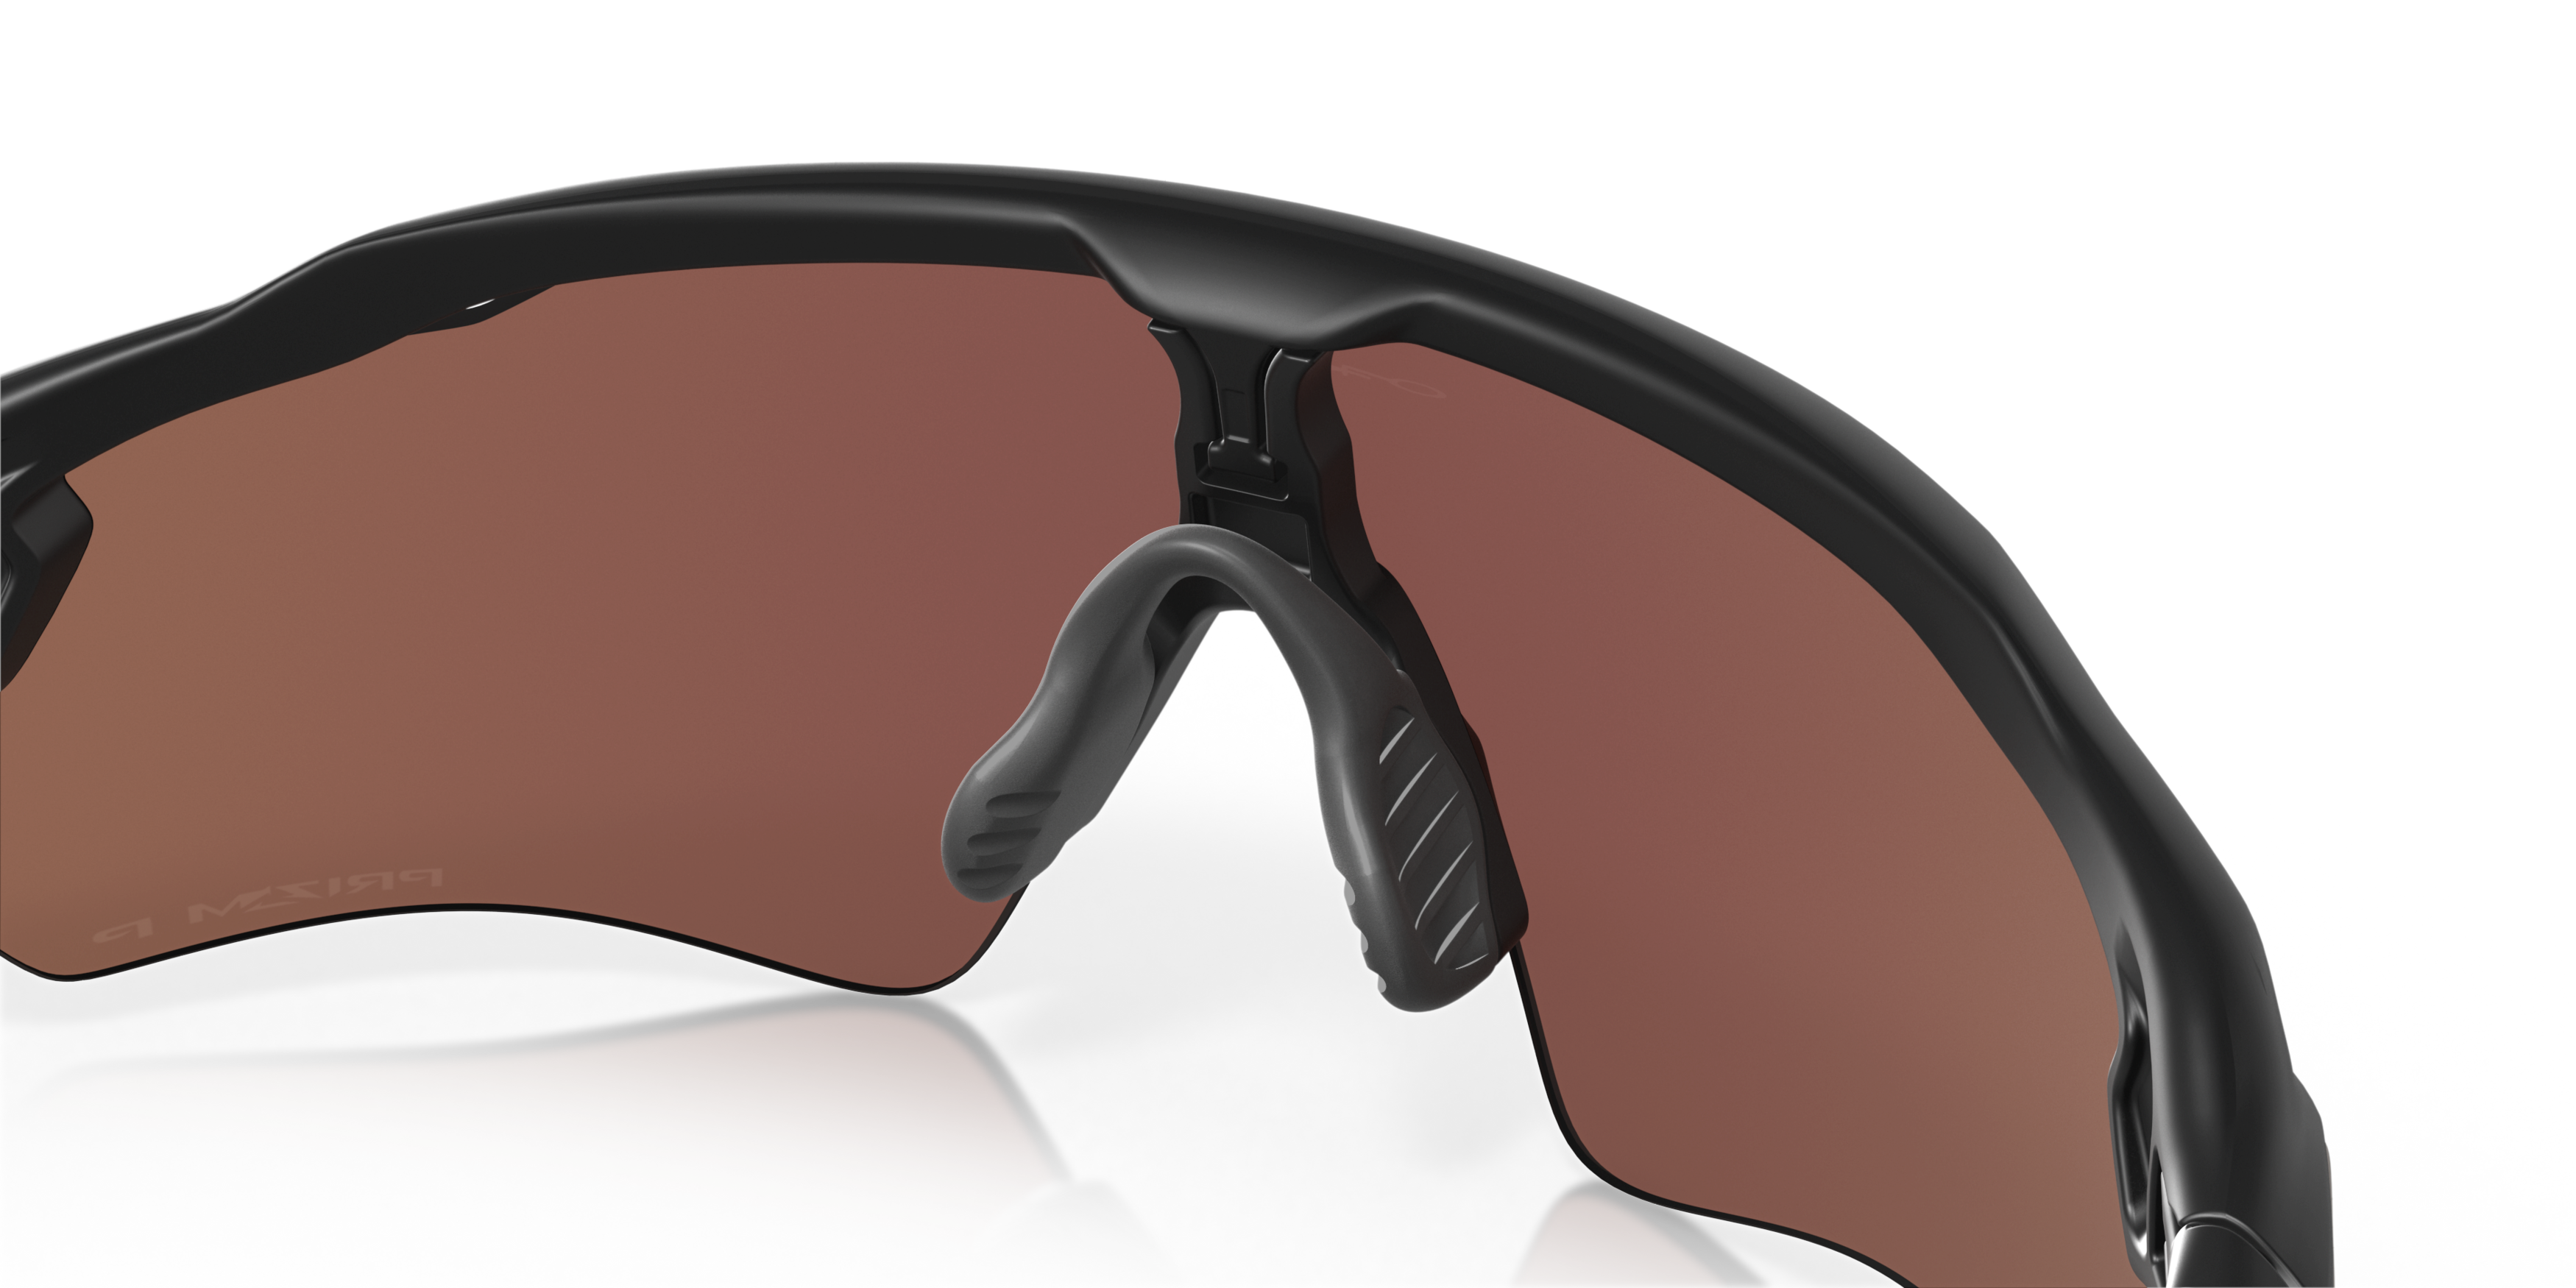 [products.image.detail03] Oakley Radar OO 9208 Sunglasses